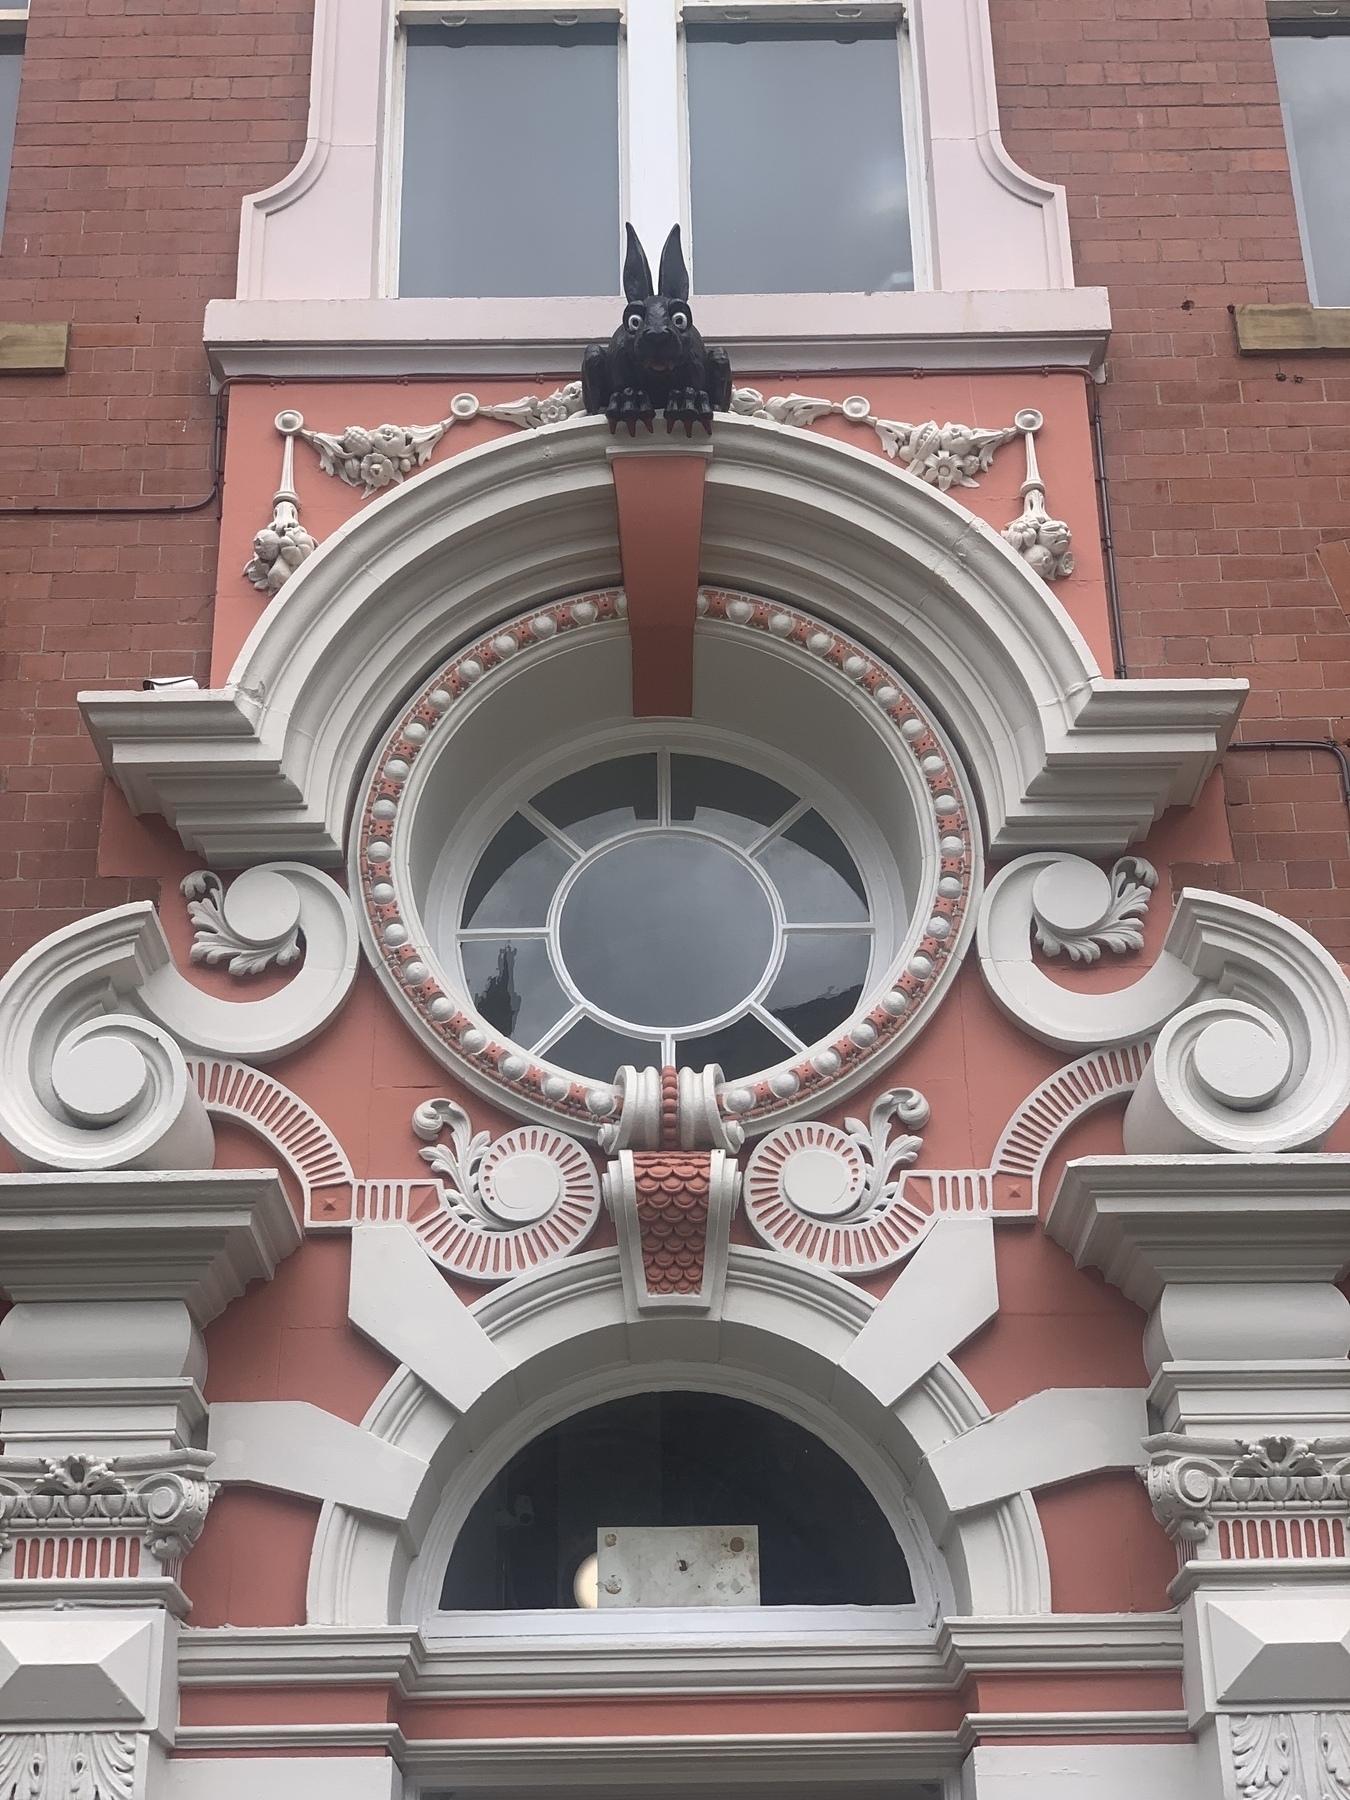 Decorative white and pink doorway with black vampire rabbit gargoyle perched above a circular window.